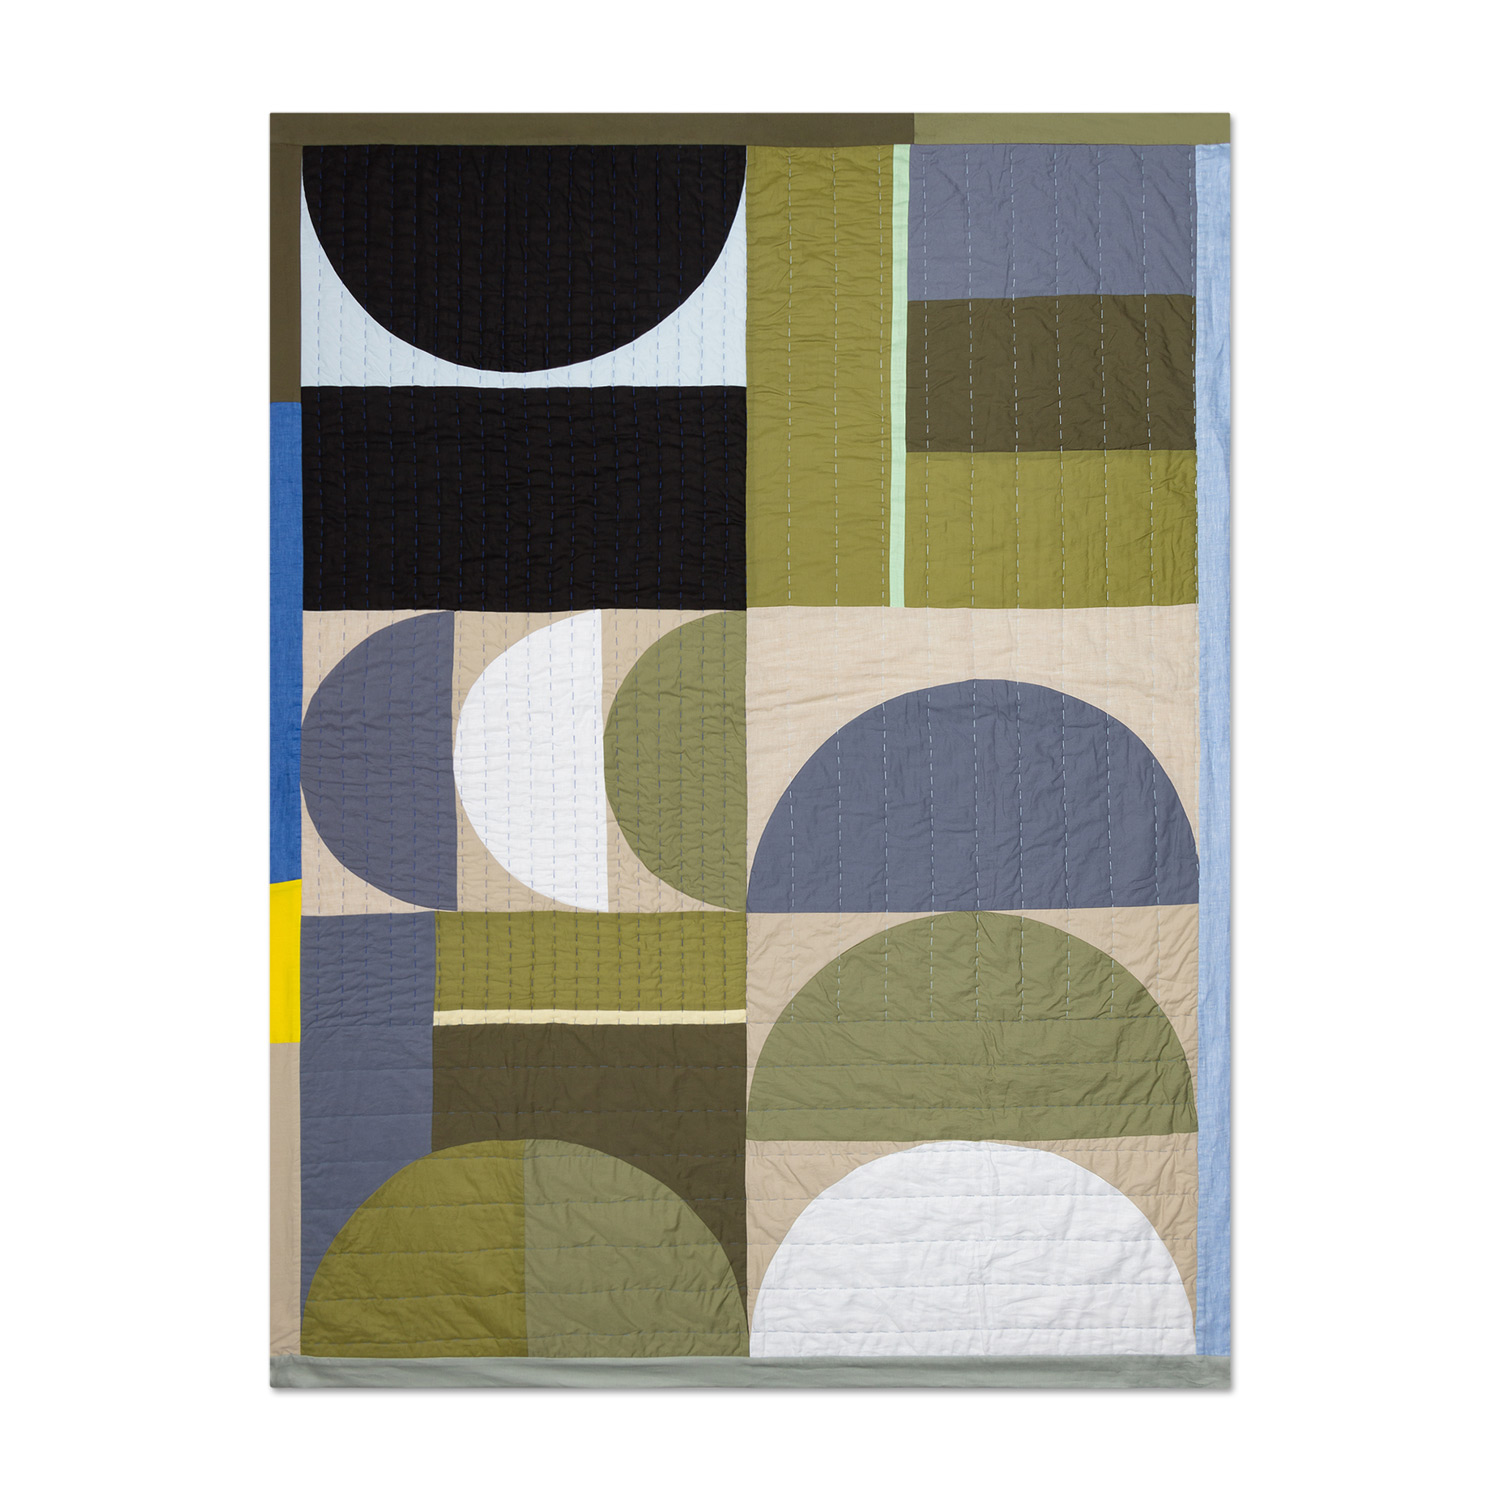 Quilt Blanket Vts 0101 Viso Project Viso Project Deep Roots Inspired By The Worlds Of Art And Design Creating Distinct Apparel And Objects Designed By Expert Artisans And Manufacturers